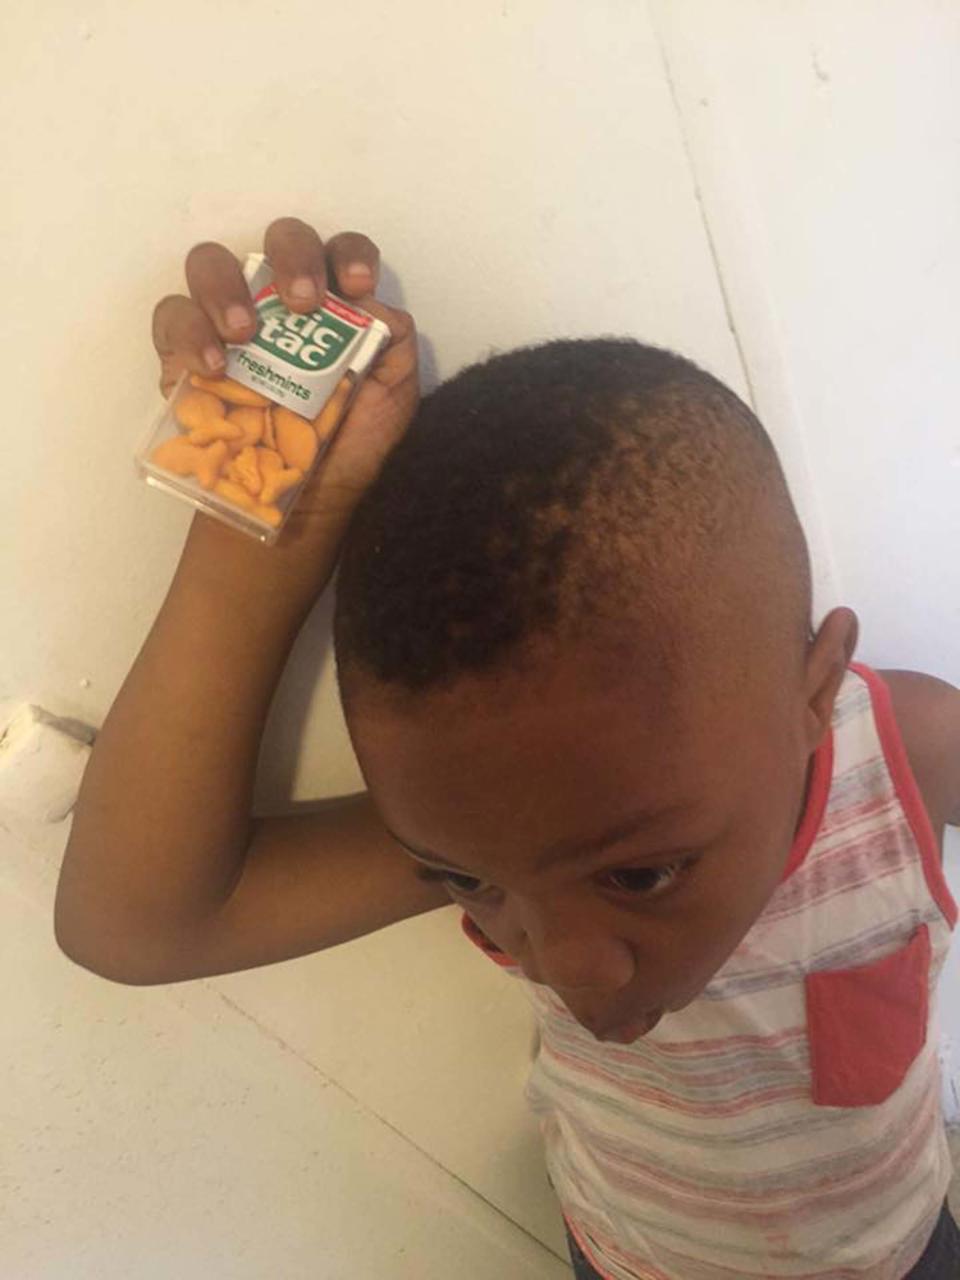 "The time he decided it was easier to keep his Goldfish in a tic tac container."